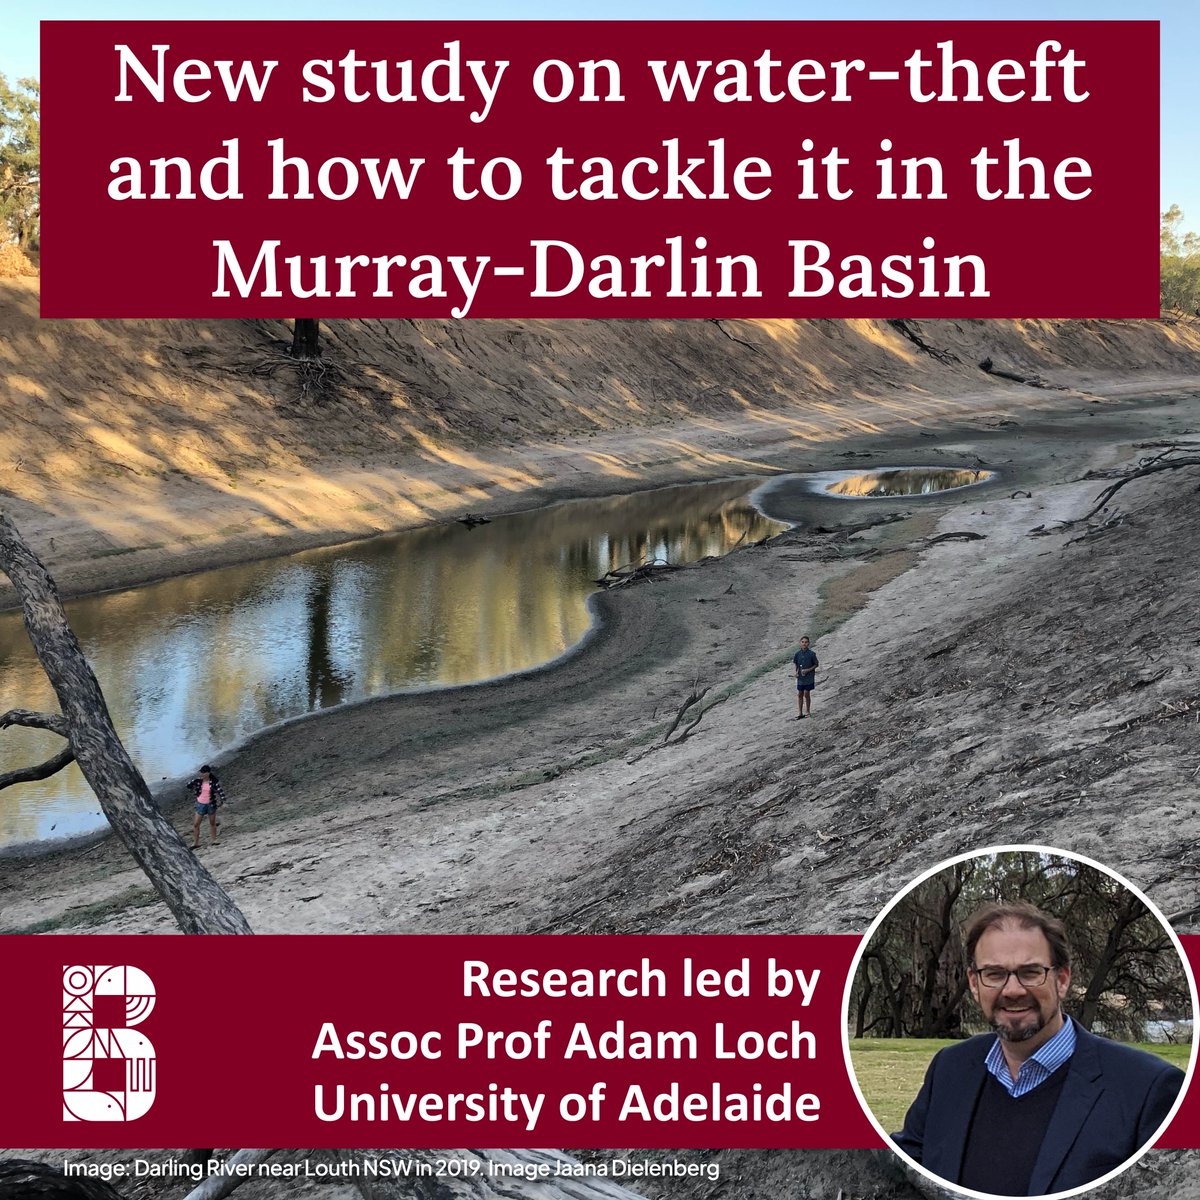 A new study led by Adam Loch @UniofAdelaide  found Water is being stolen in the MDB and widely varying state laws and penalties and a reluctance to prosecute water-theft in some states undermines the security of the water market and environmental flows.

The study by water,…